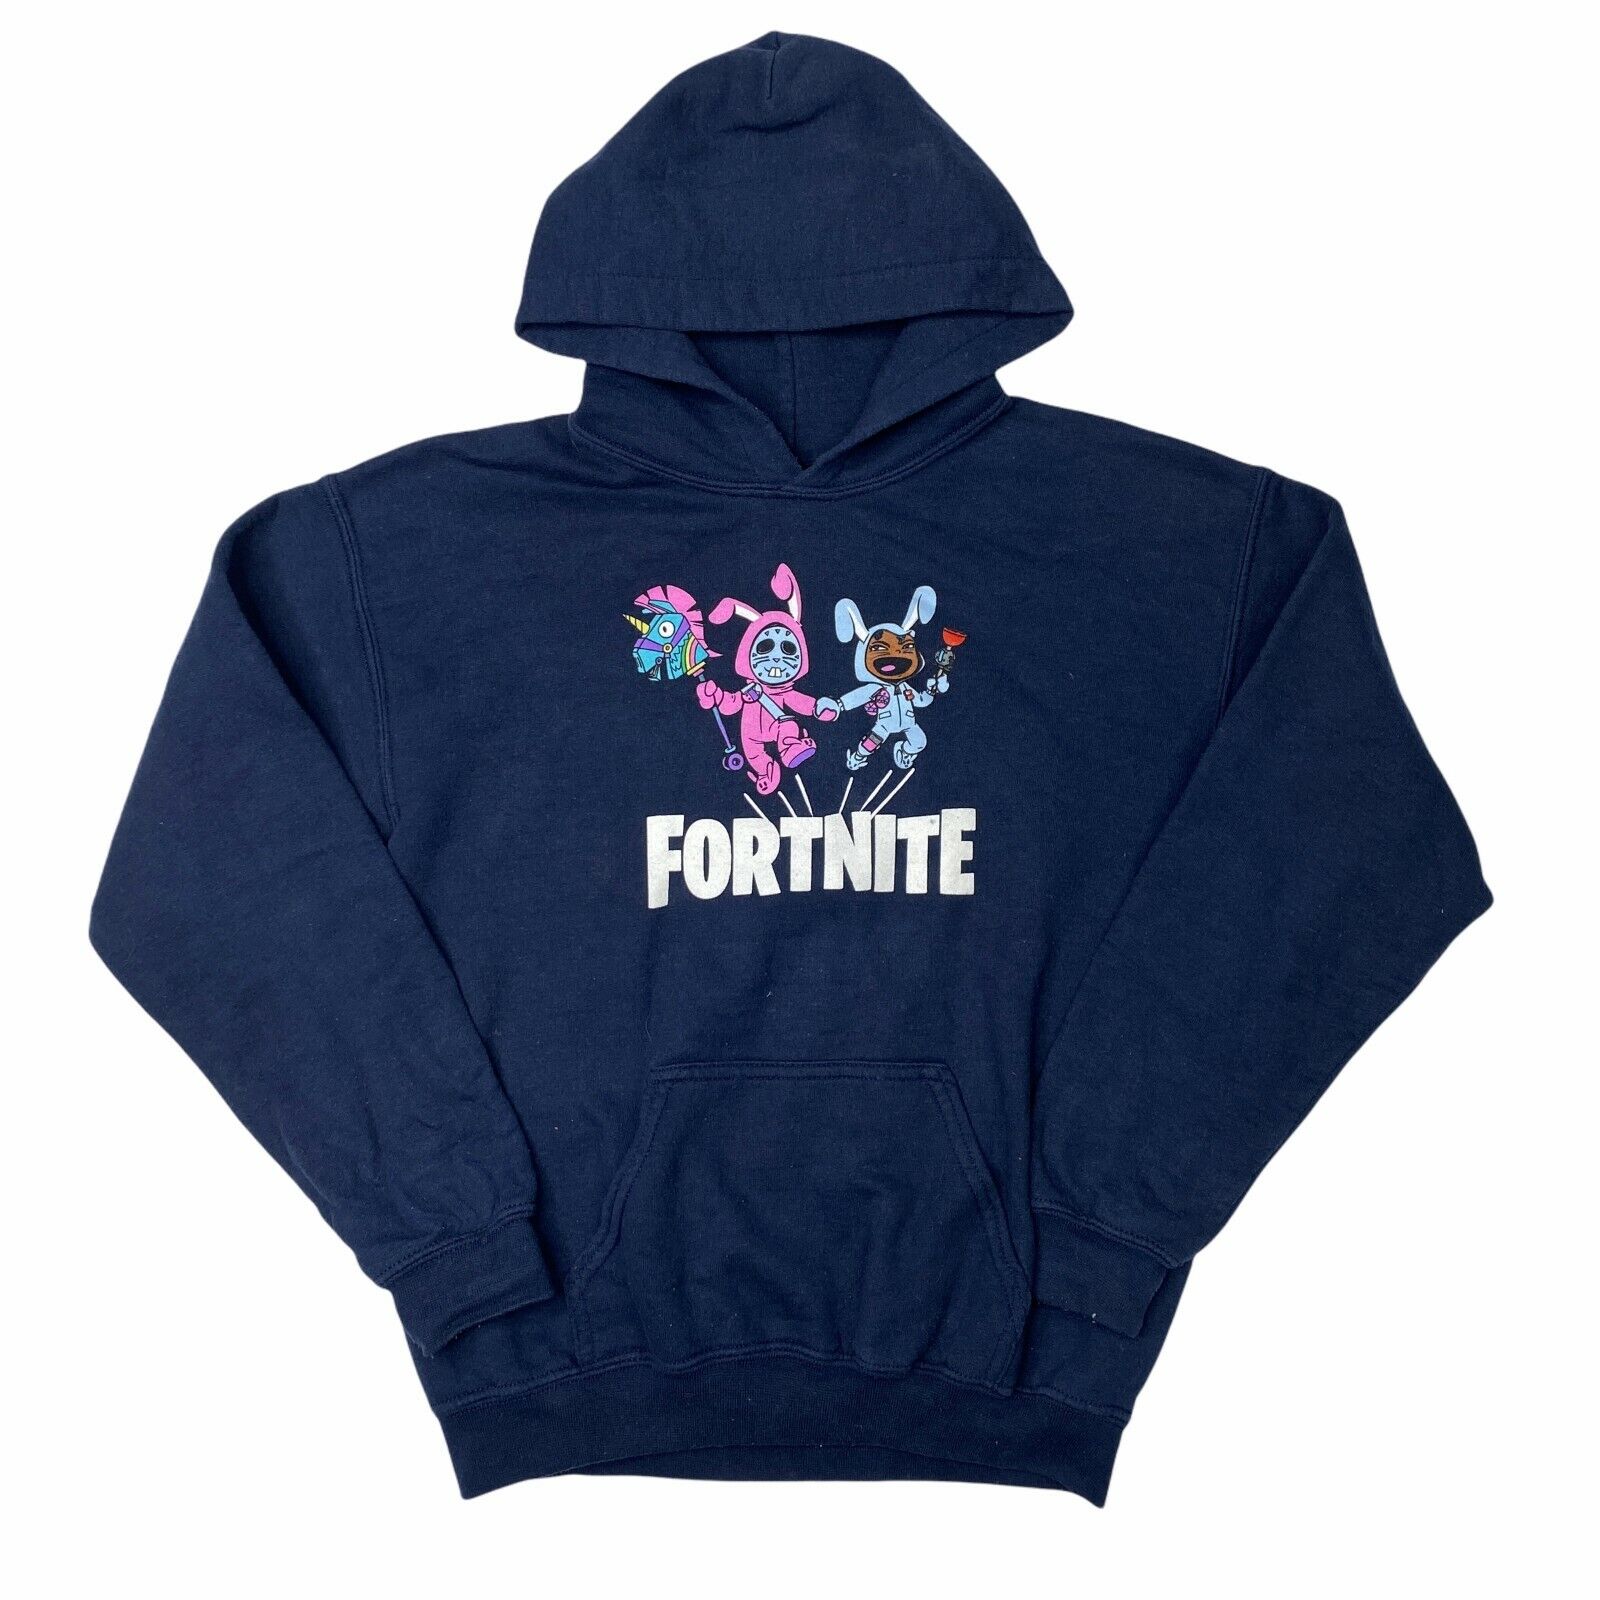 Fortnite Graphic Print Pullover Hoodie Sweatshirt Navy Blue Youth L Large